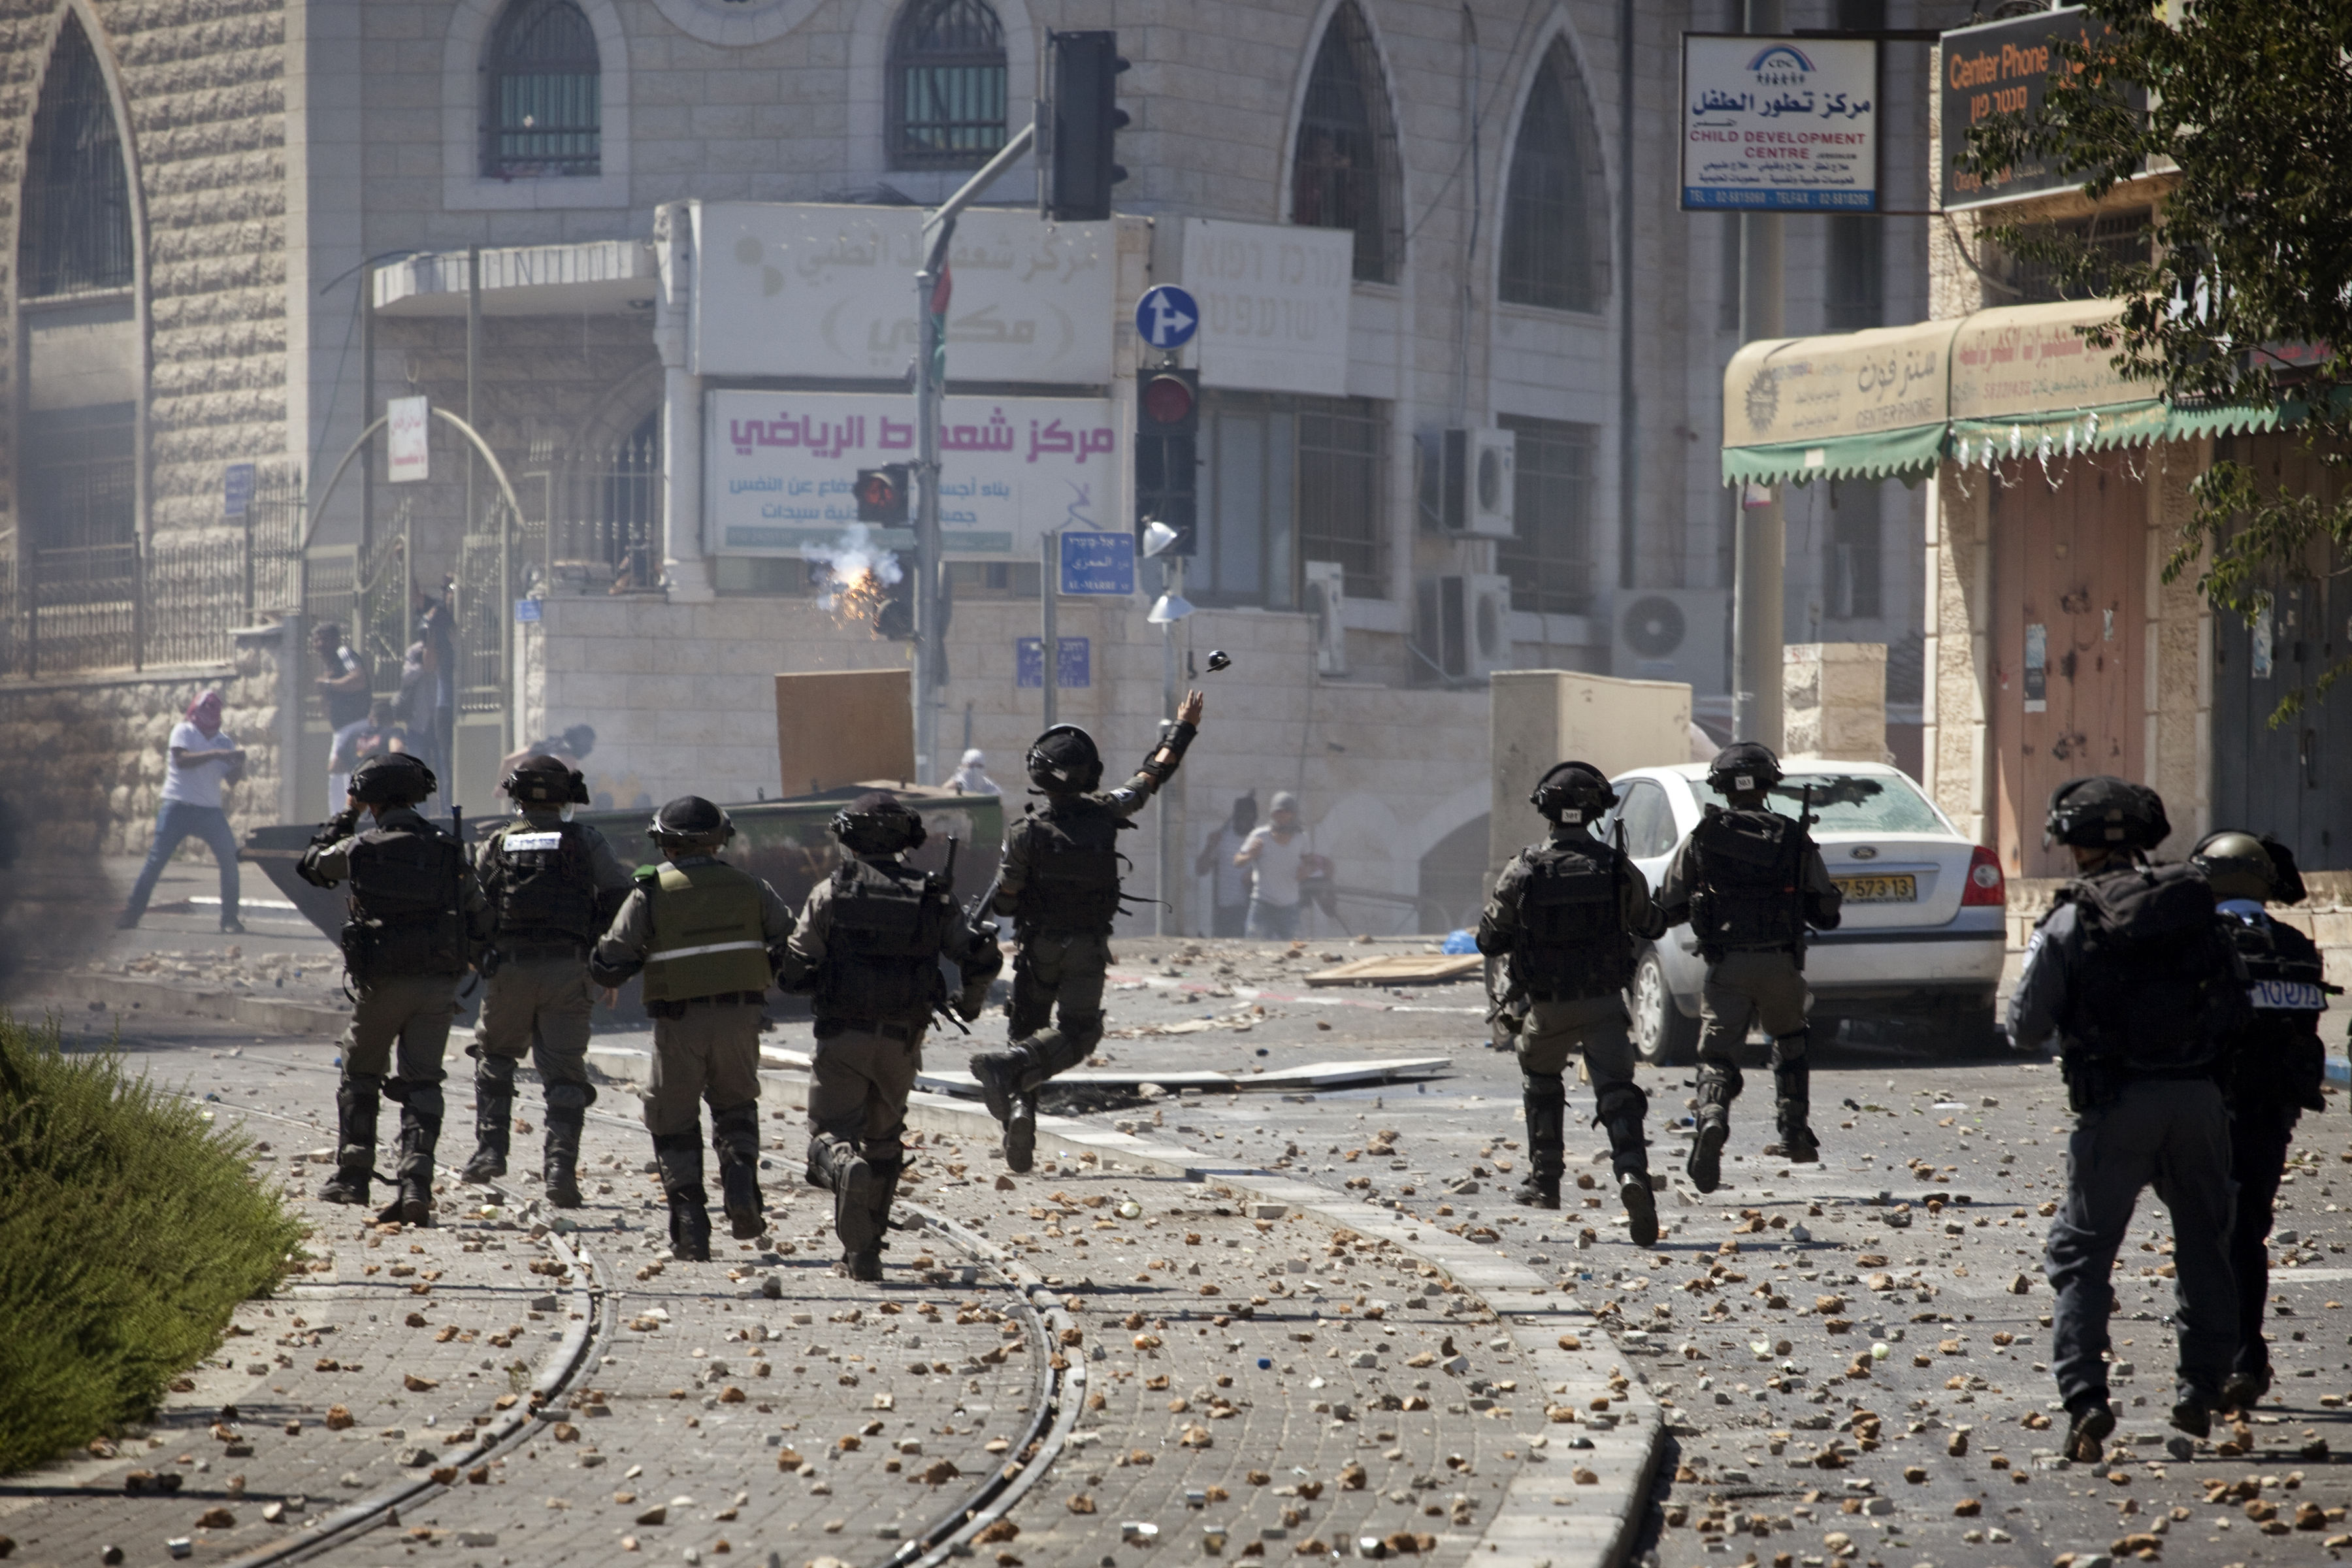 An Israeli soldier throws a grenade during clashes with Palestinians after a suspected kidnap and murder of a Palestinian teen (Pacific Press—LightRocket/Getty Images)